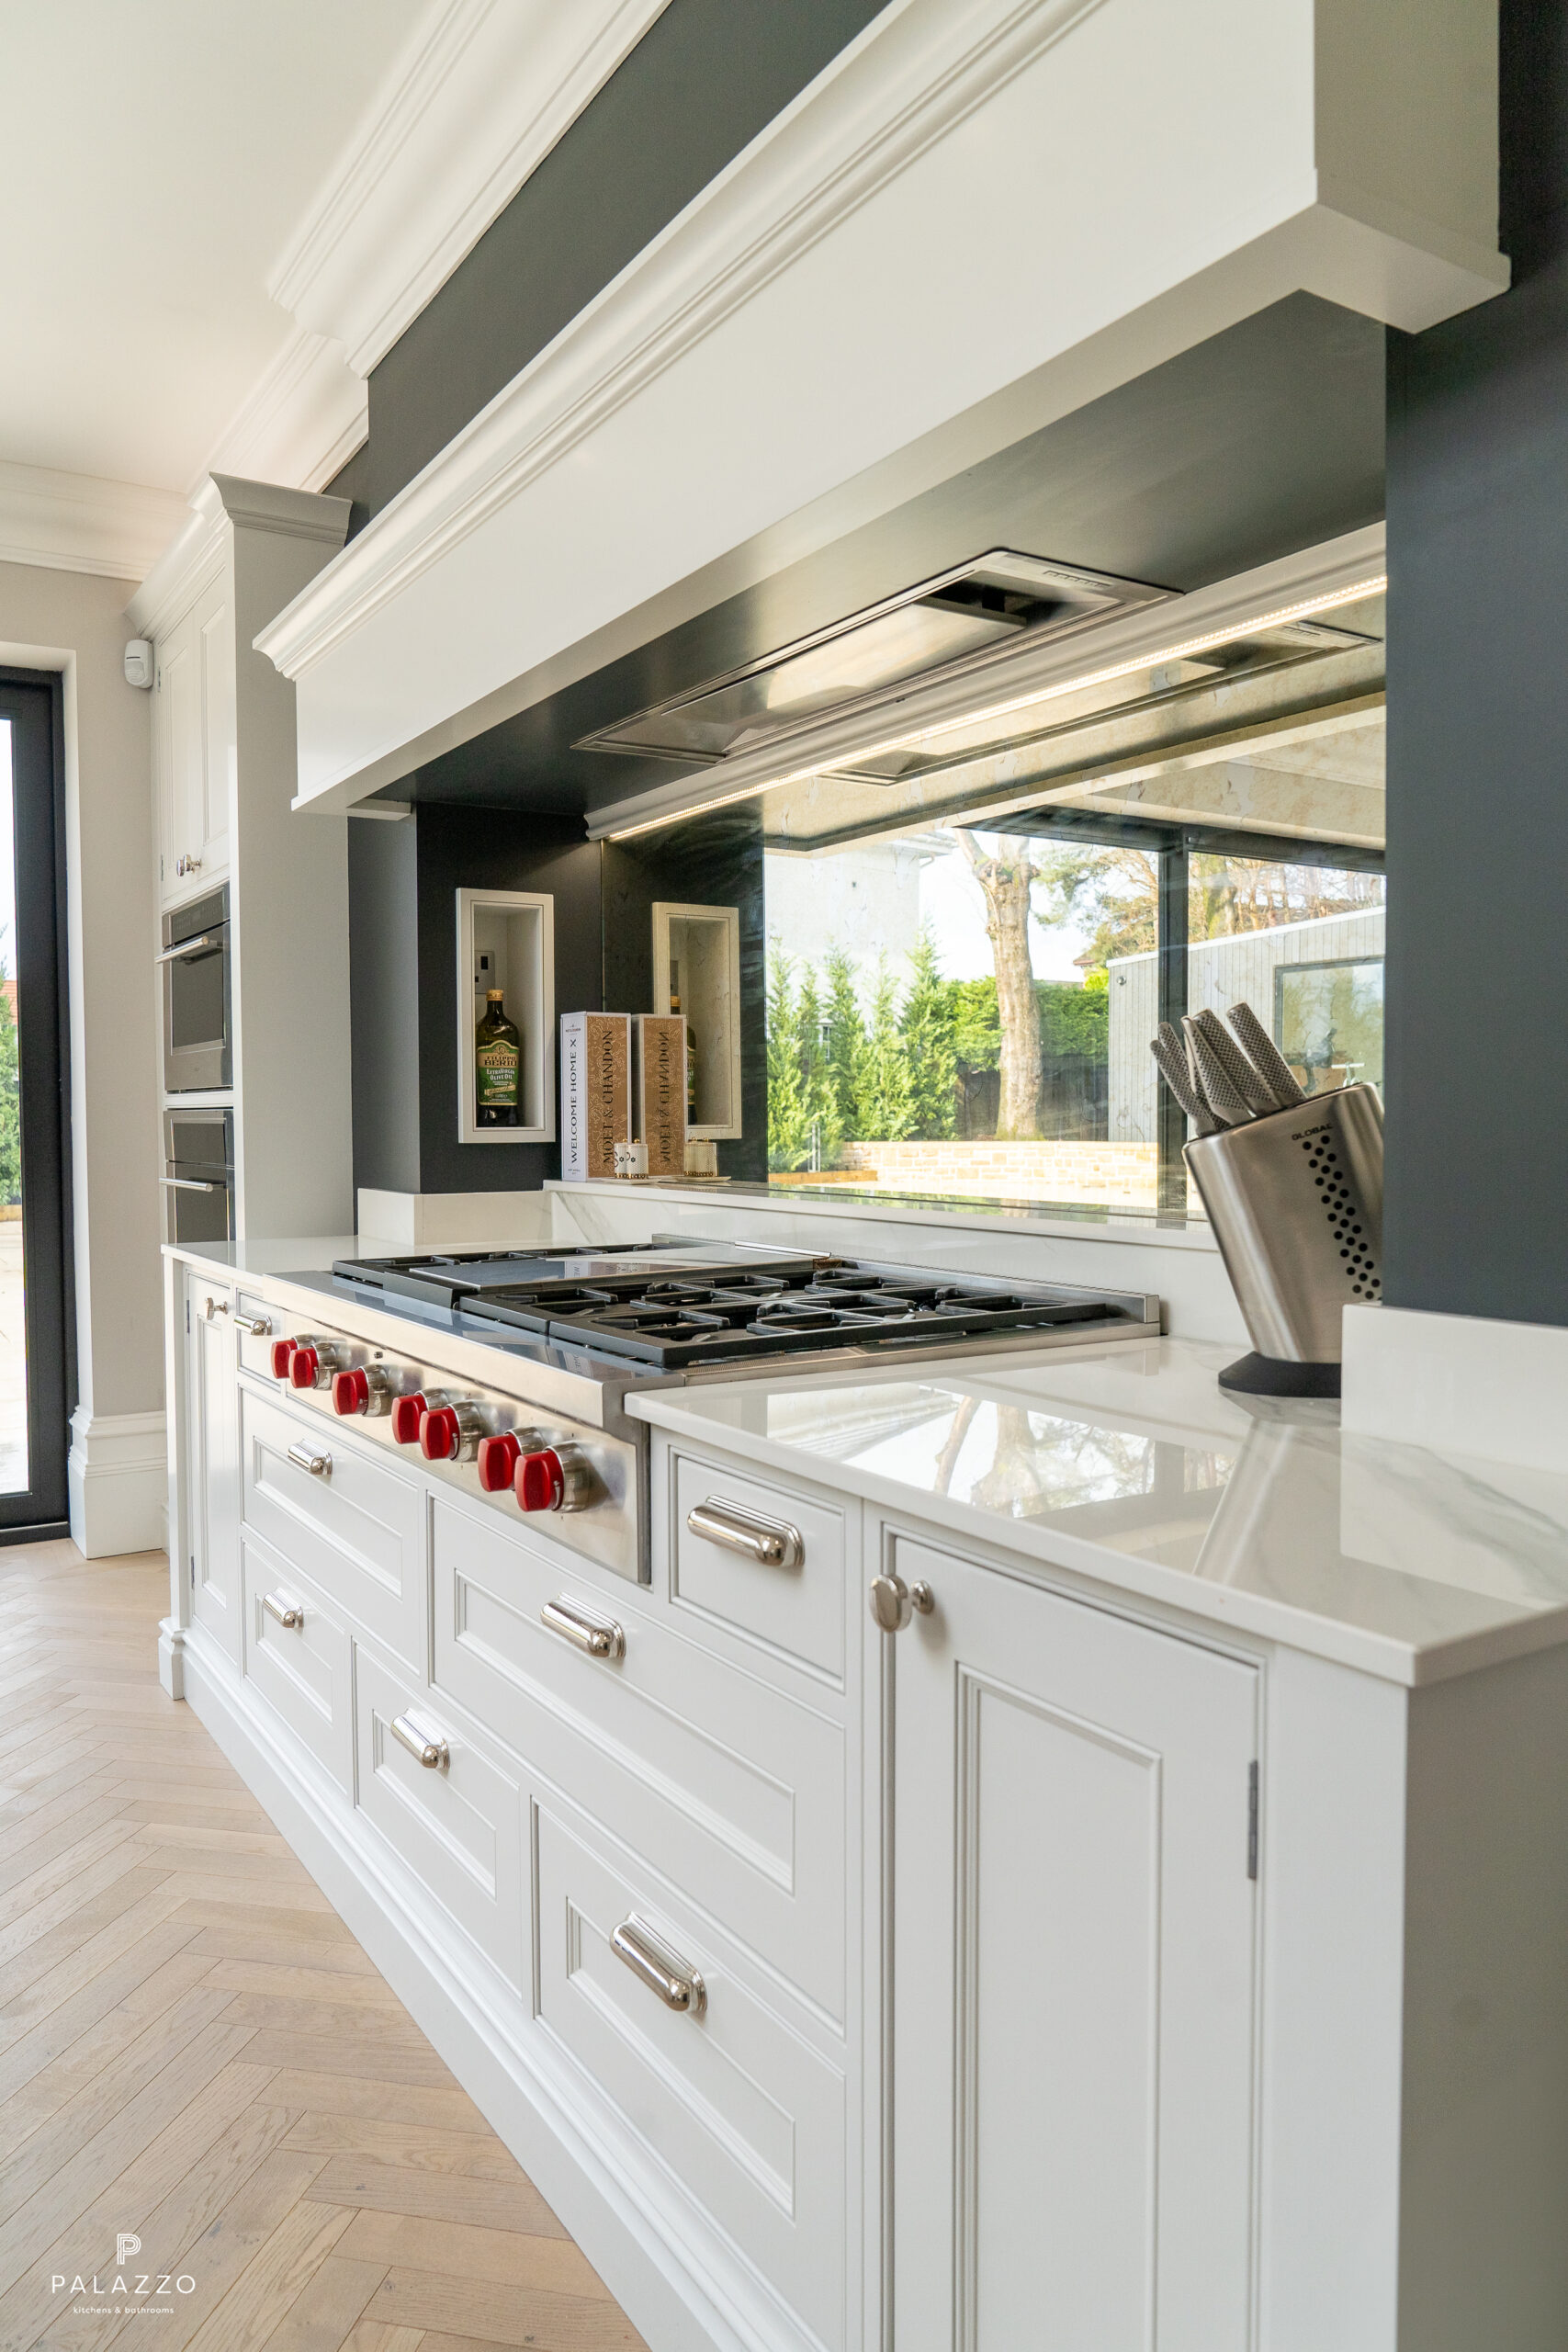 Image 14: An In-Frame Kitchen In A New Home Extension In Glasgow